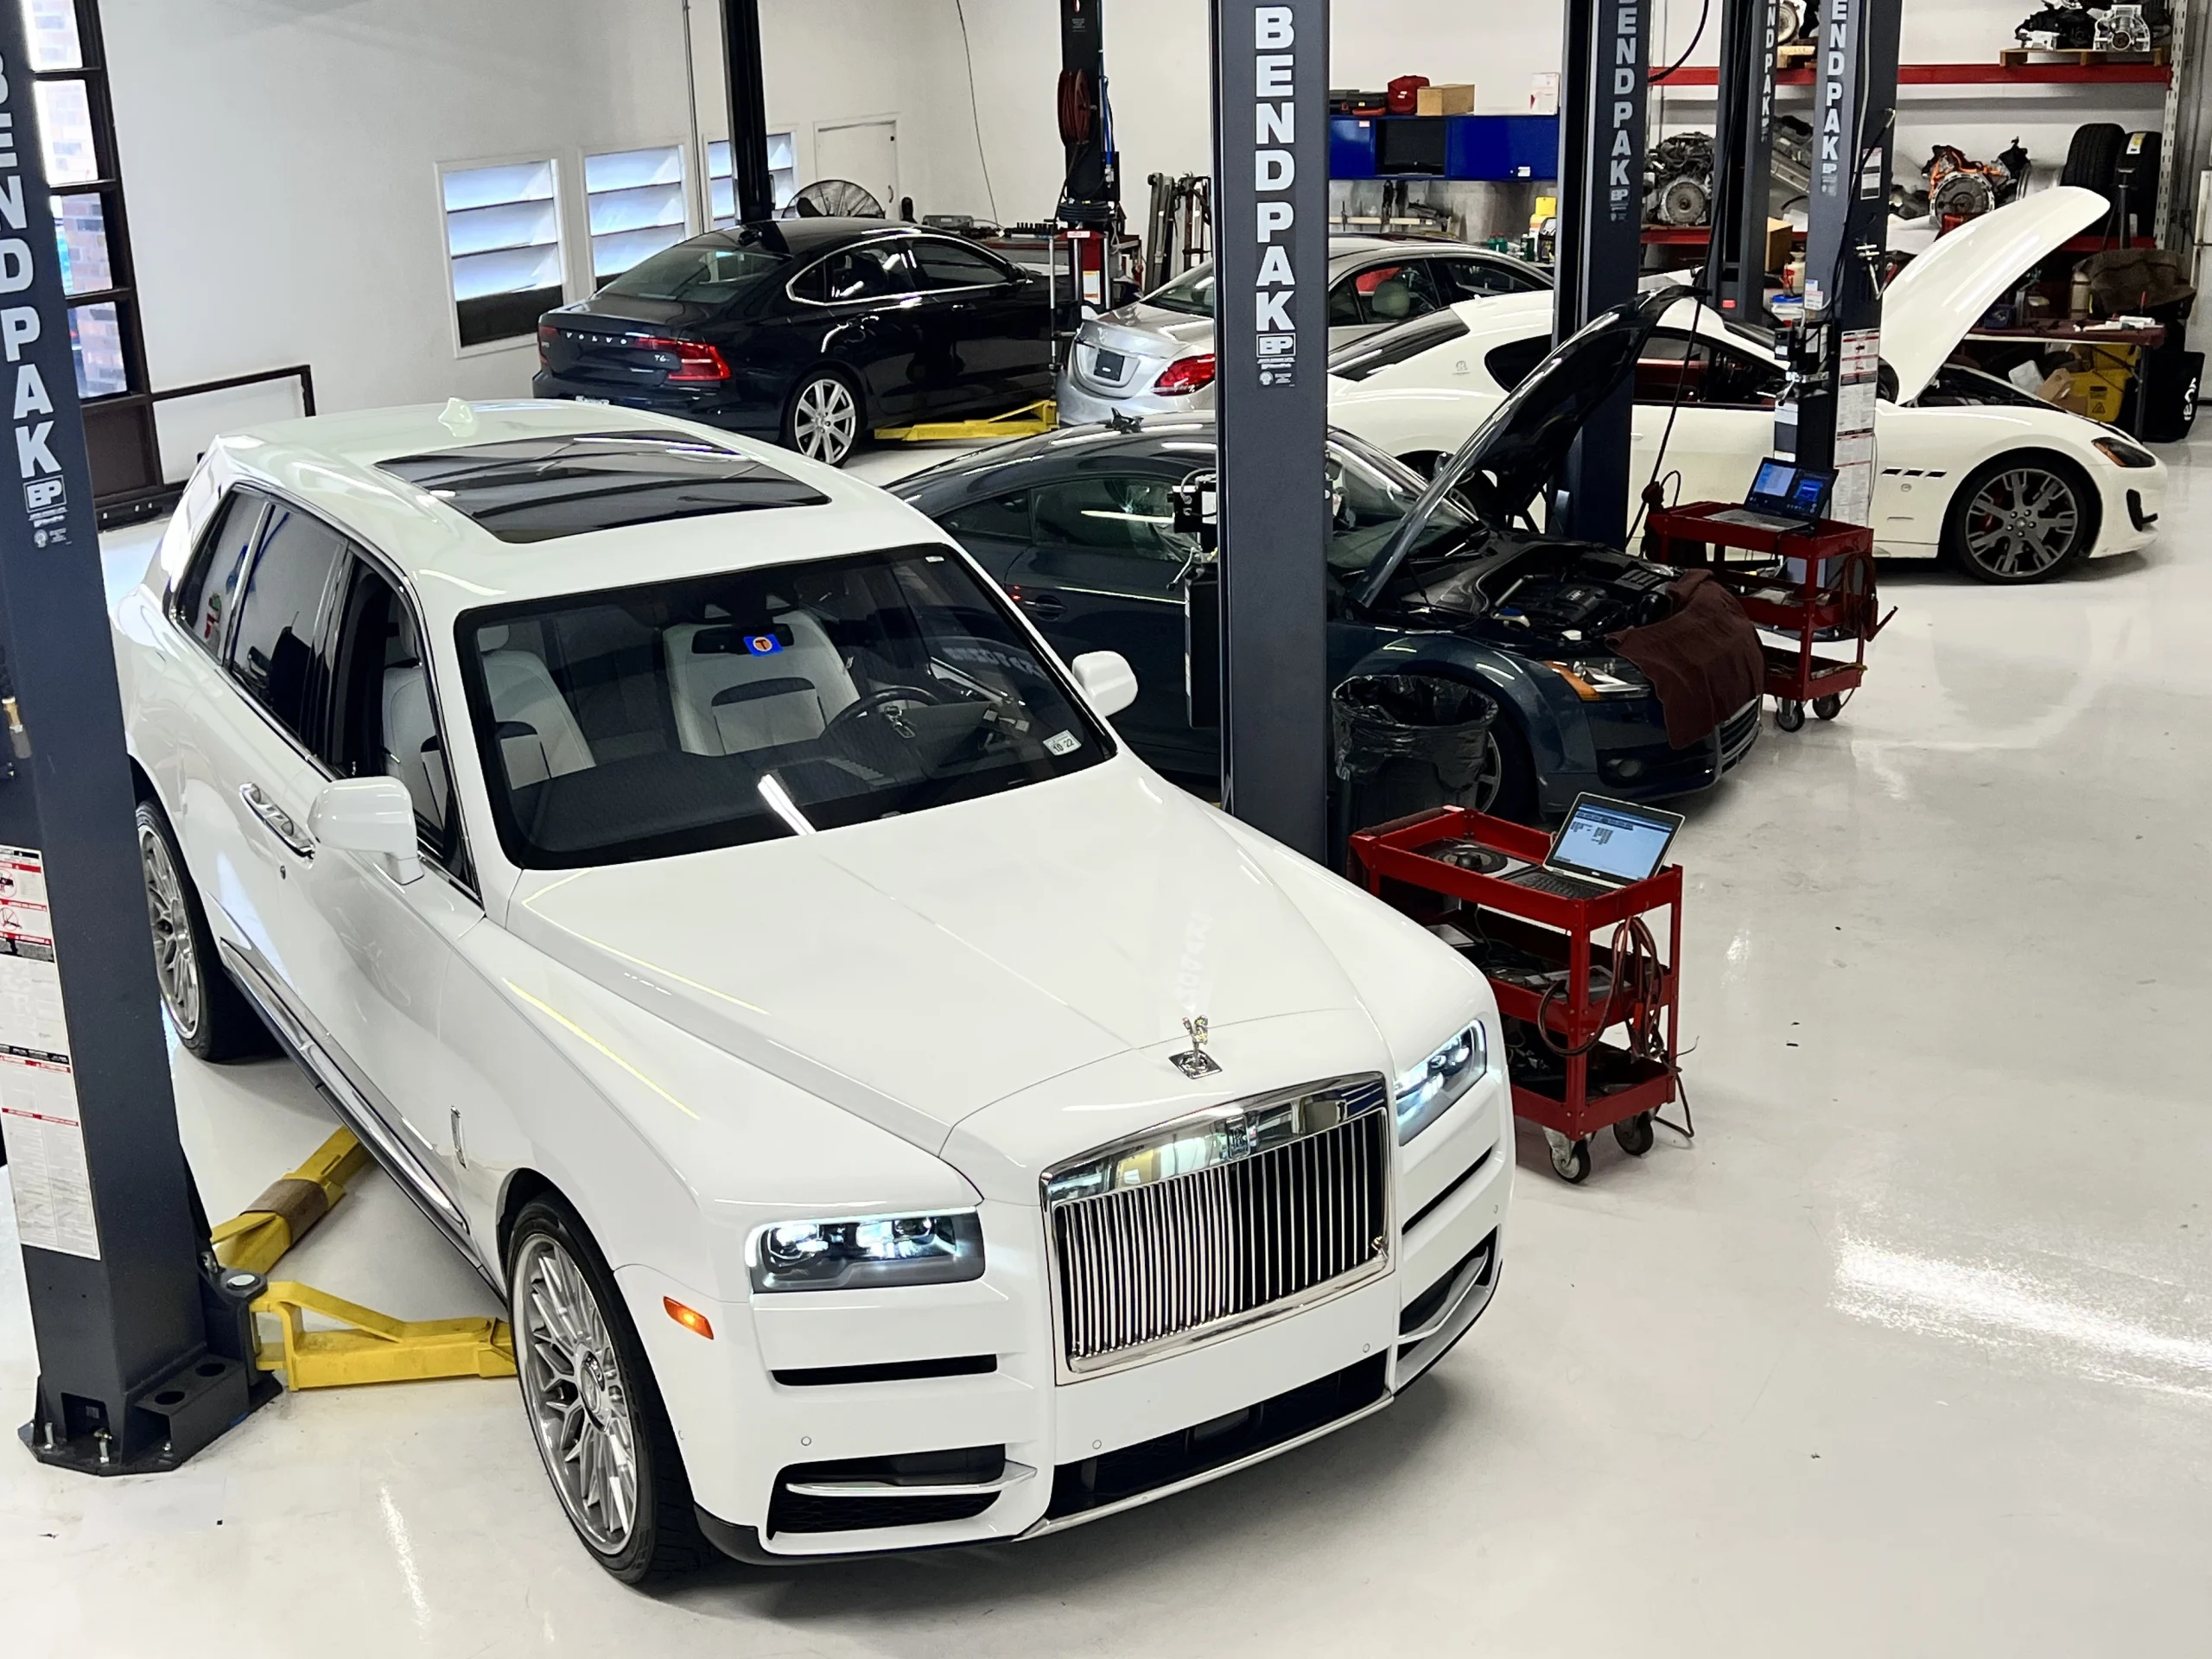 Cartisan  ROLLS ROYCE GHOST OIL CHANGE  In the images  Facebook